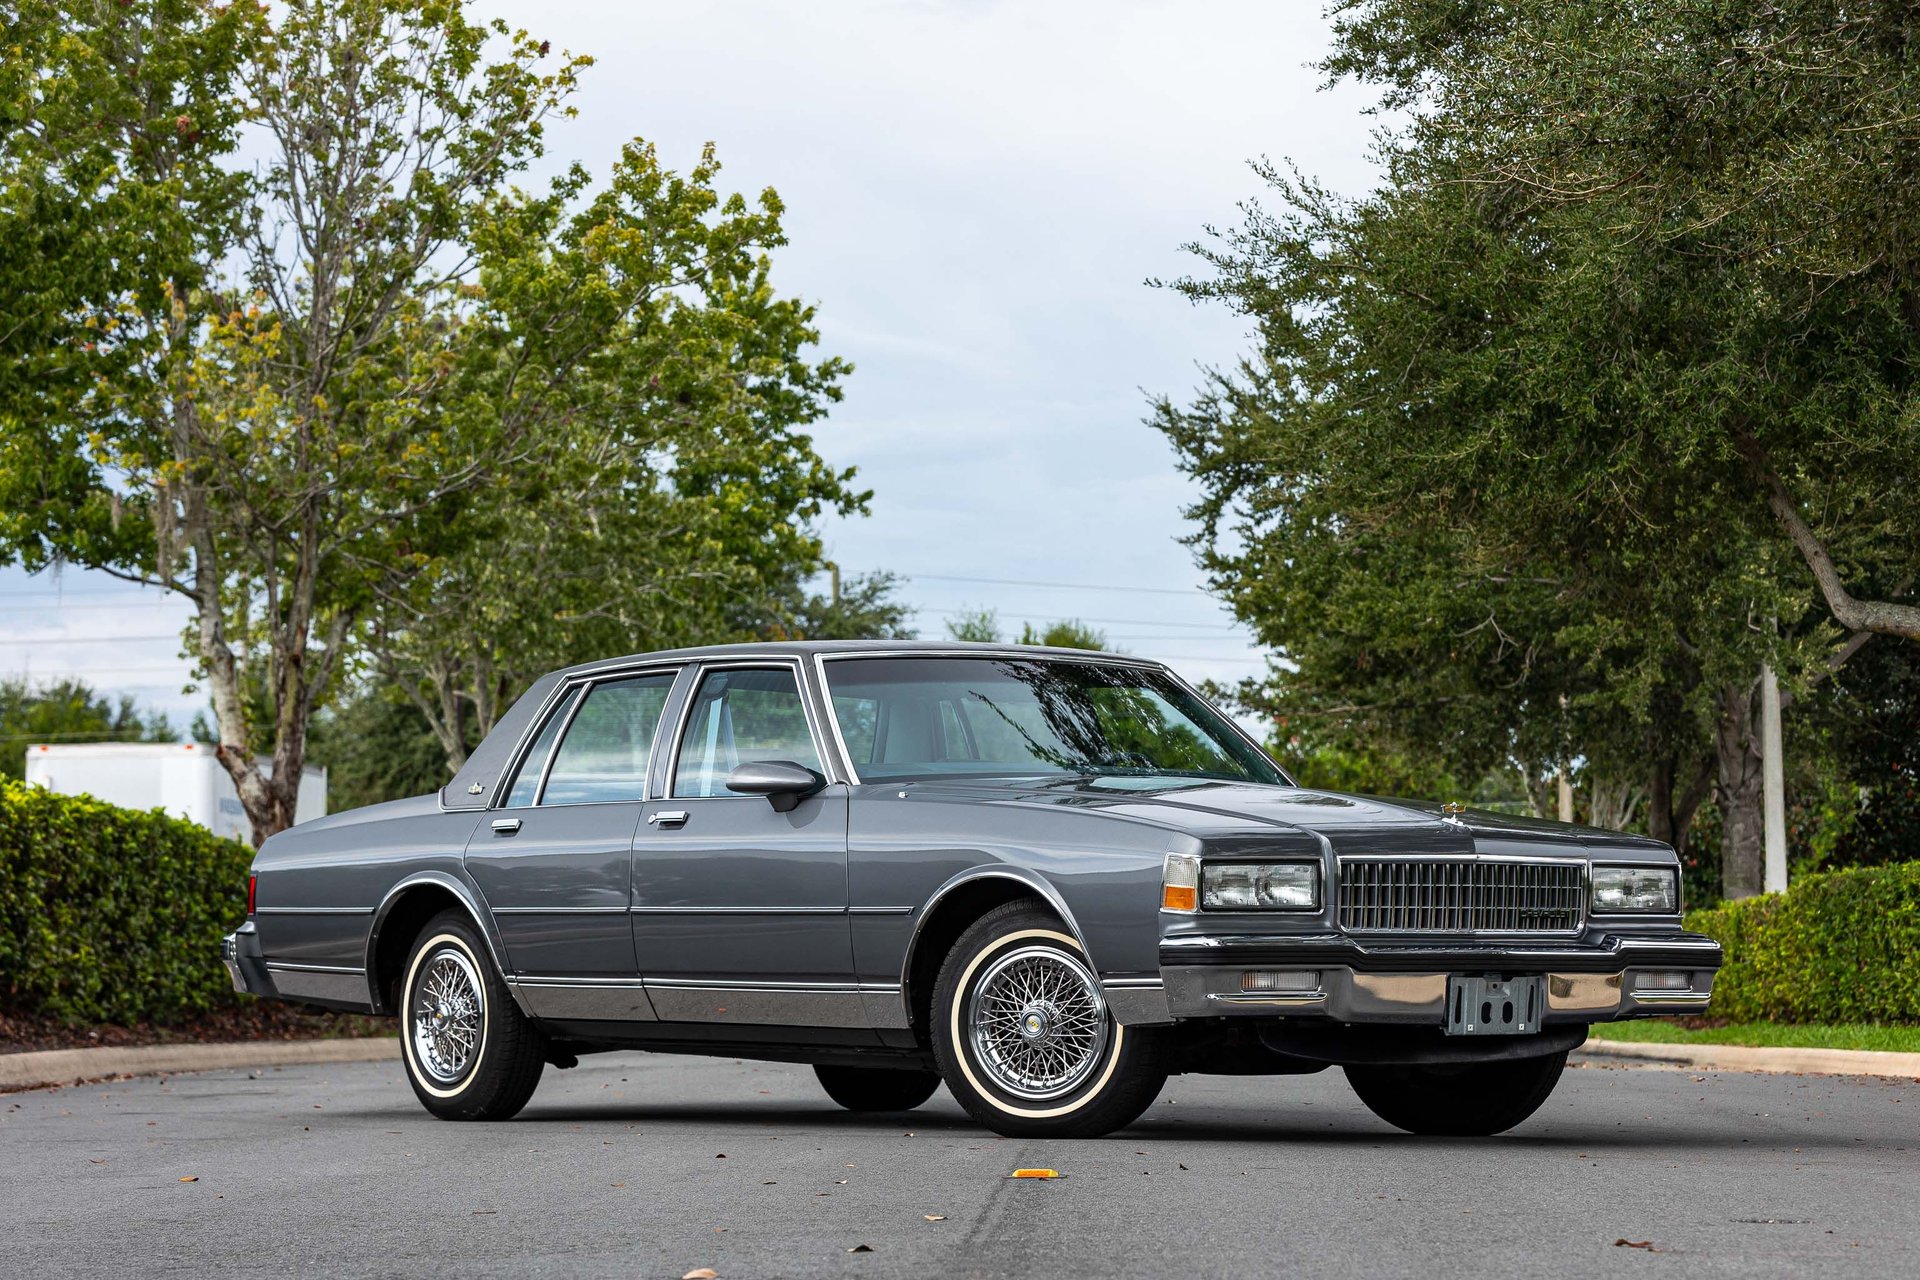 1990 Chevrolet Caprice Classic Sold | Motorious